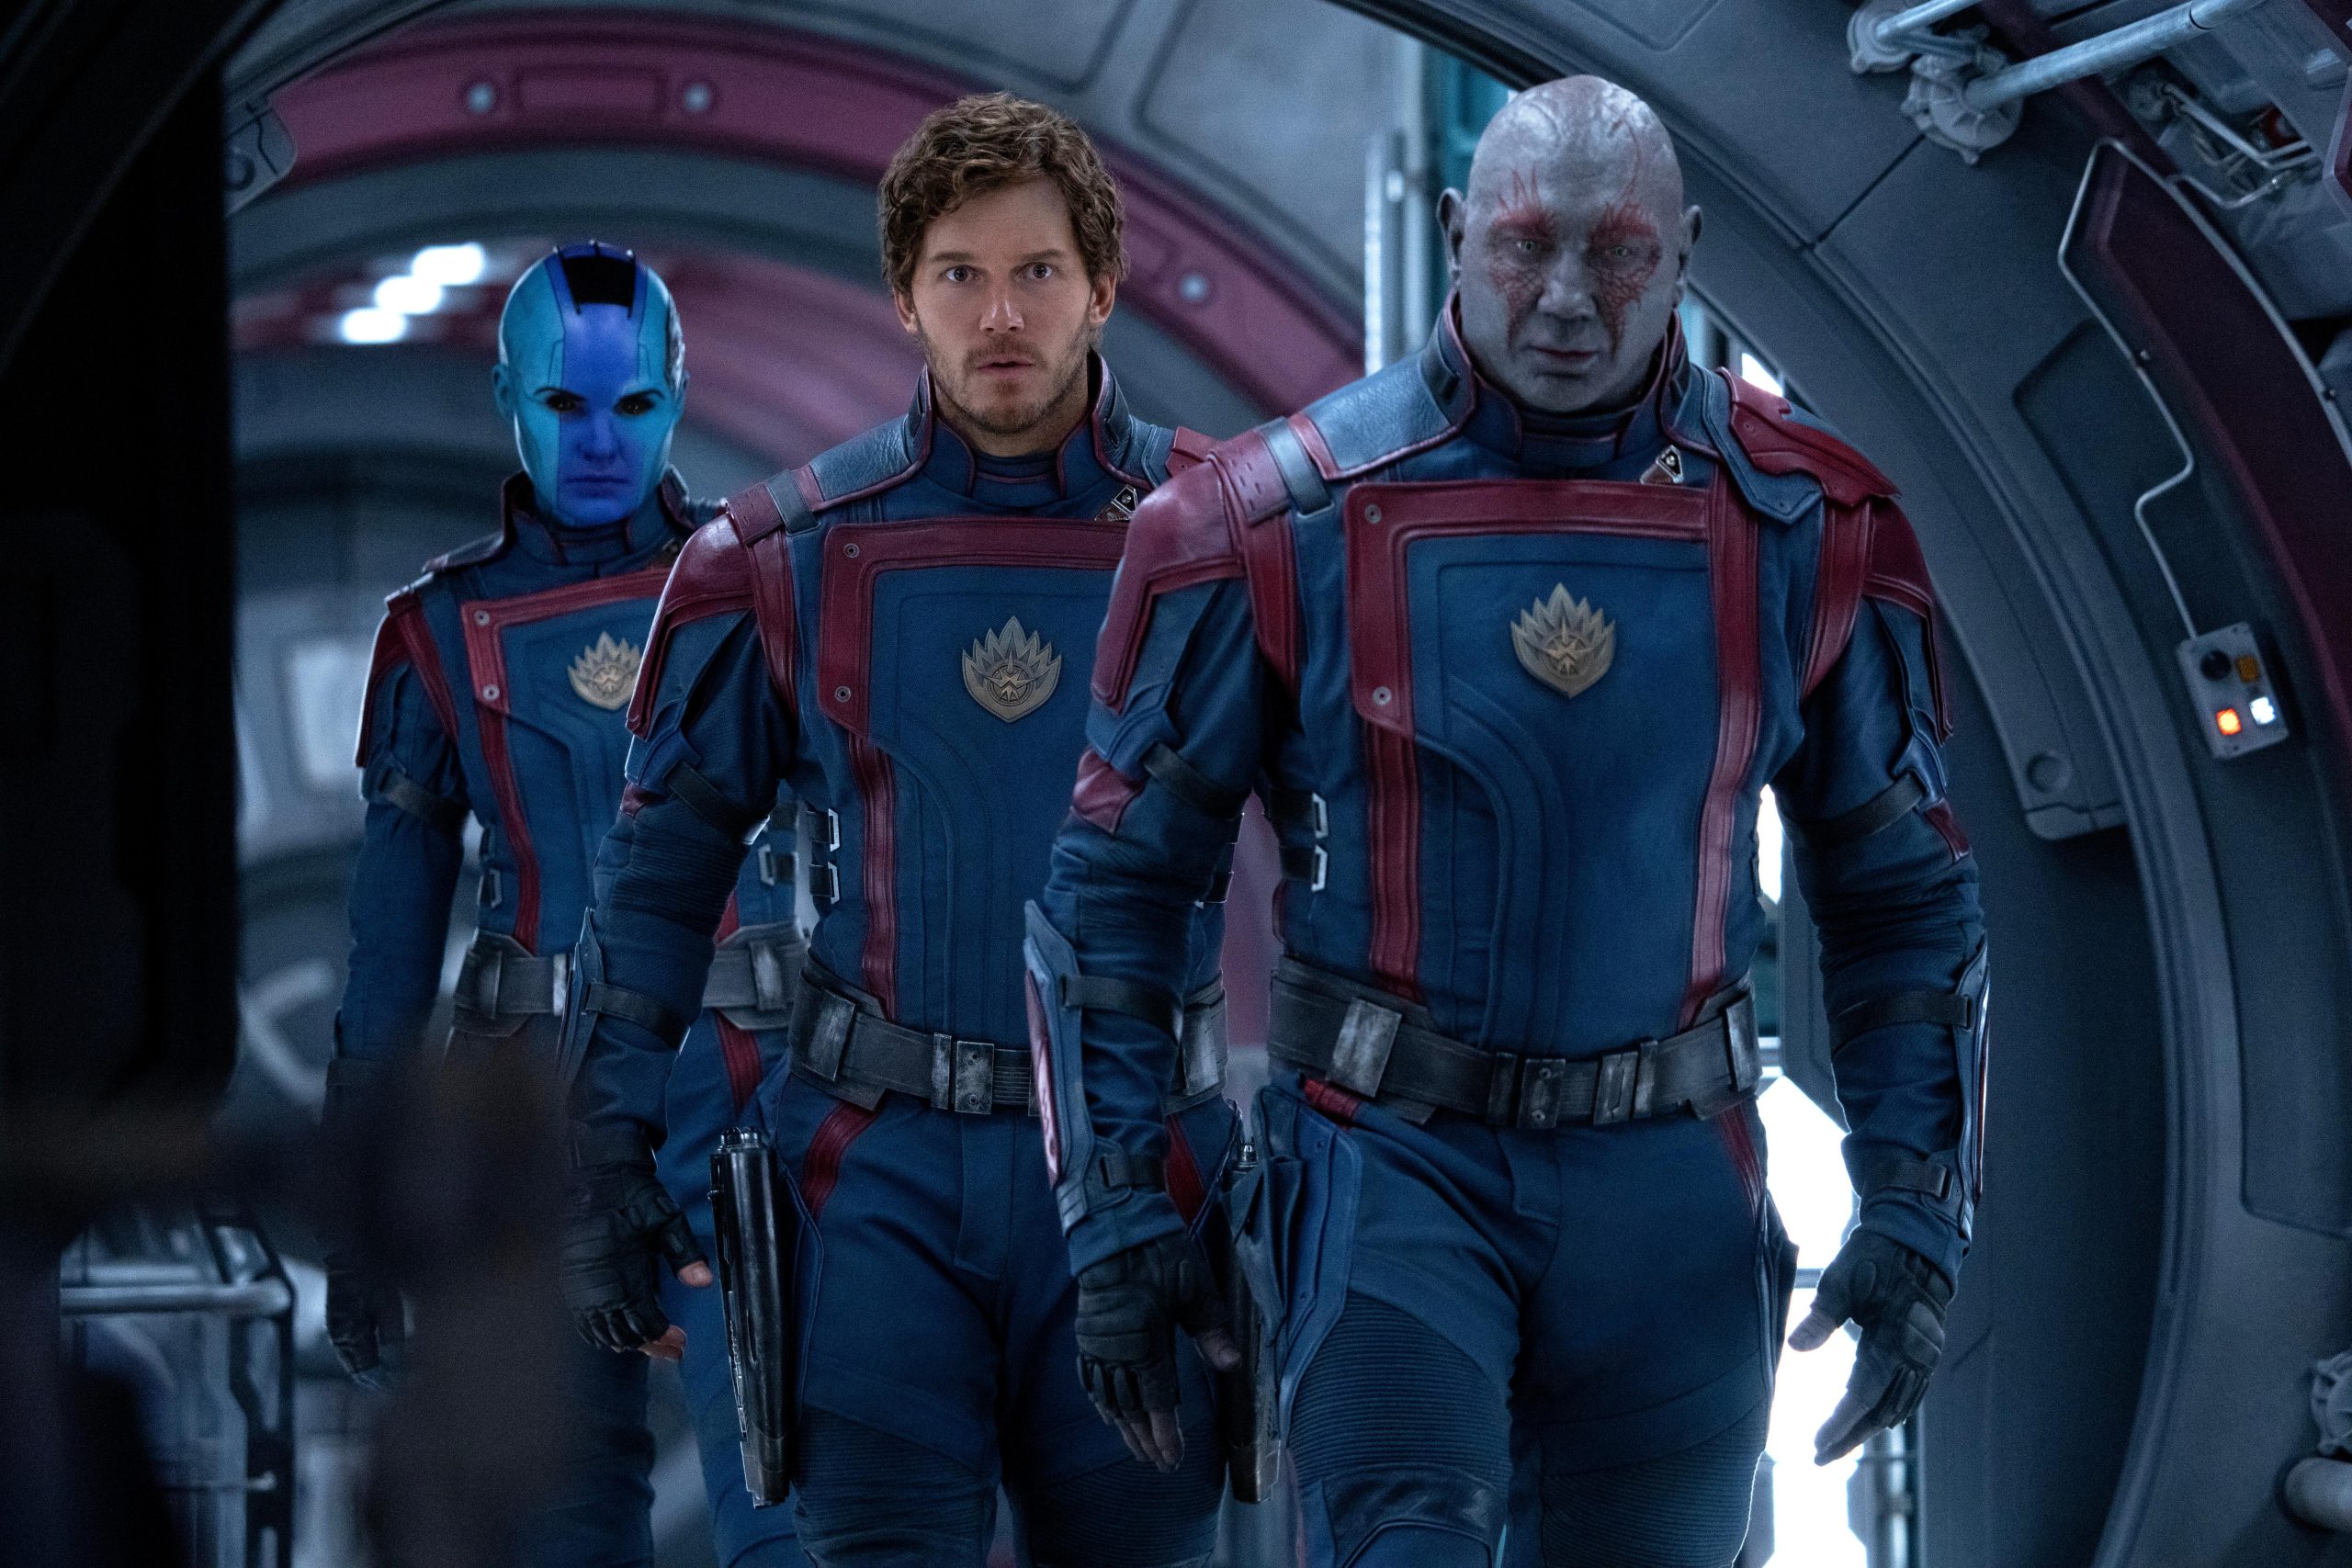 Guardians of the galaxy vol.3